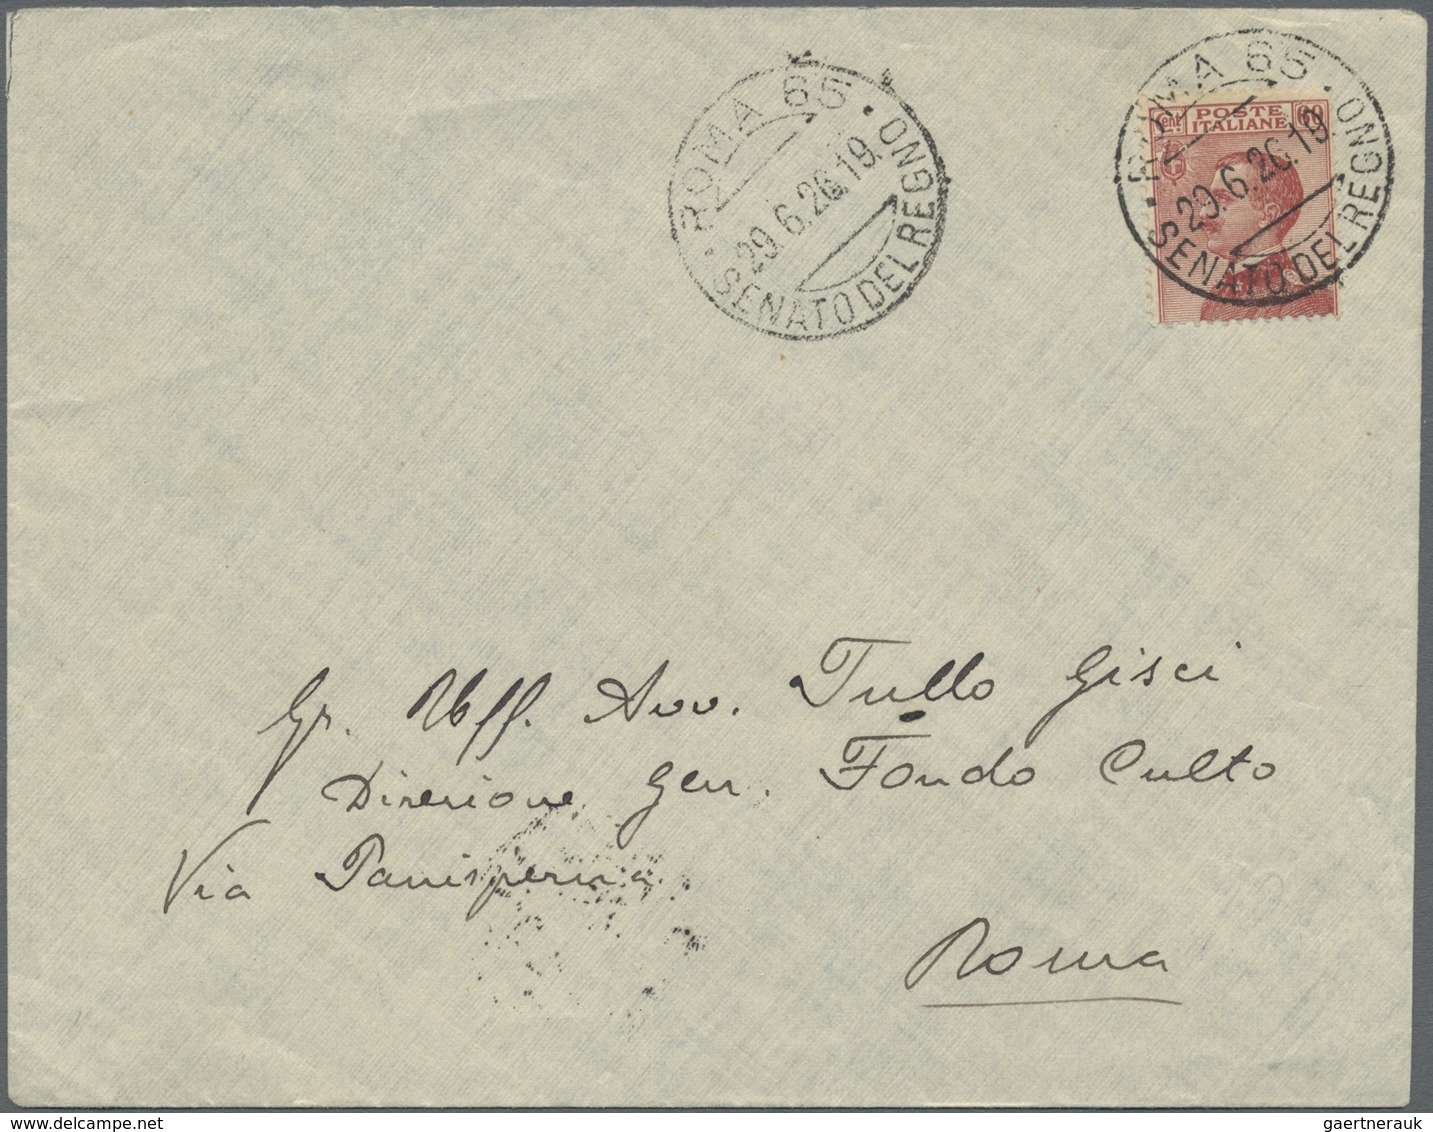 Br Italien - Stempel: "ROMA CAMERA DEL DEPUTATI" clear on two preprinting covers 1924 and 1925 (one "Il